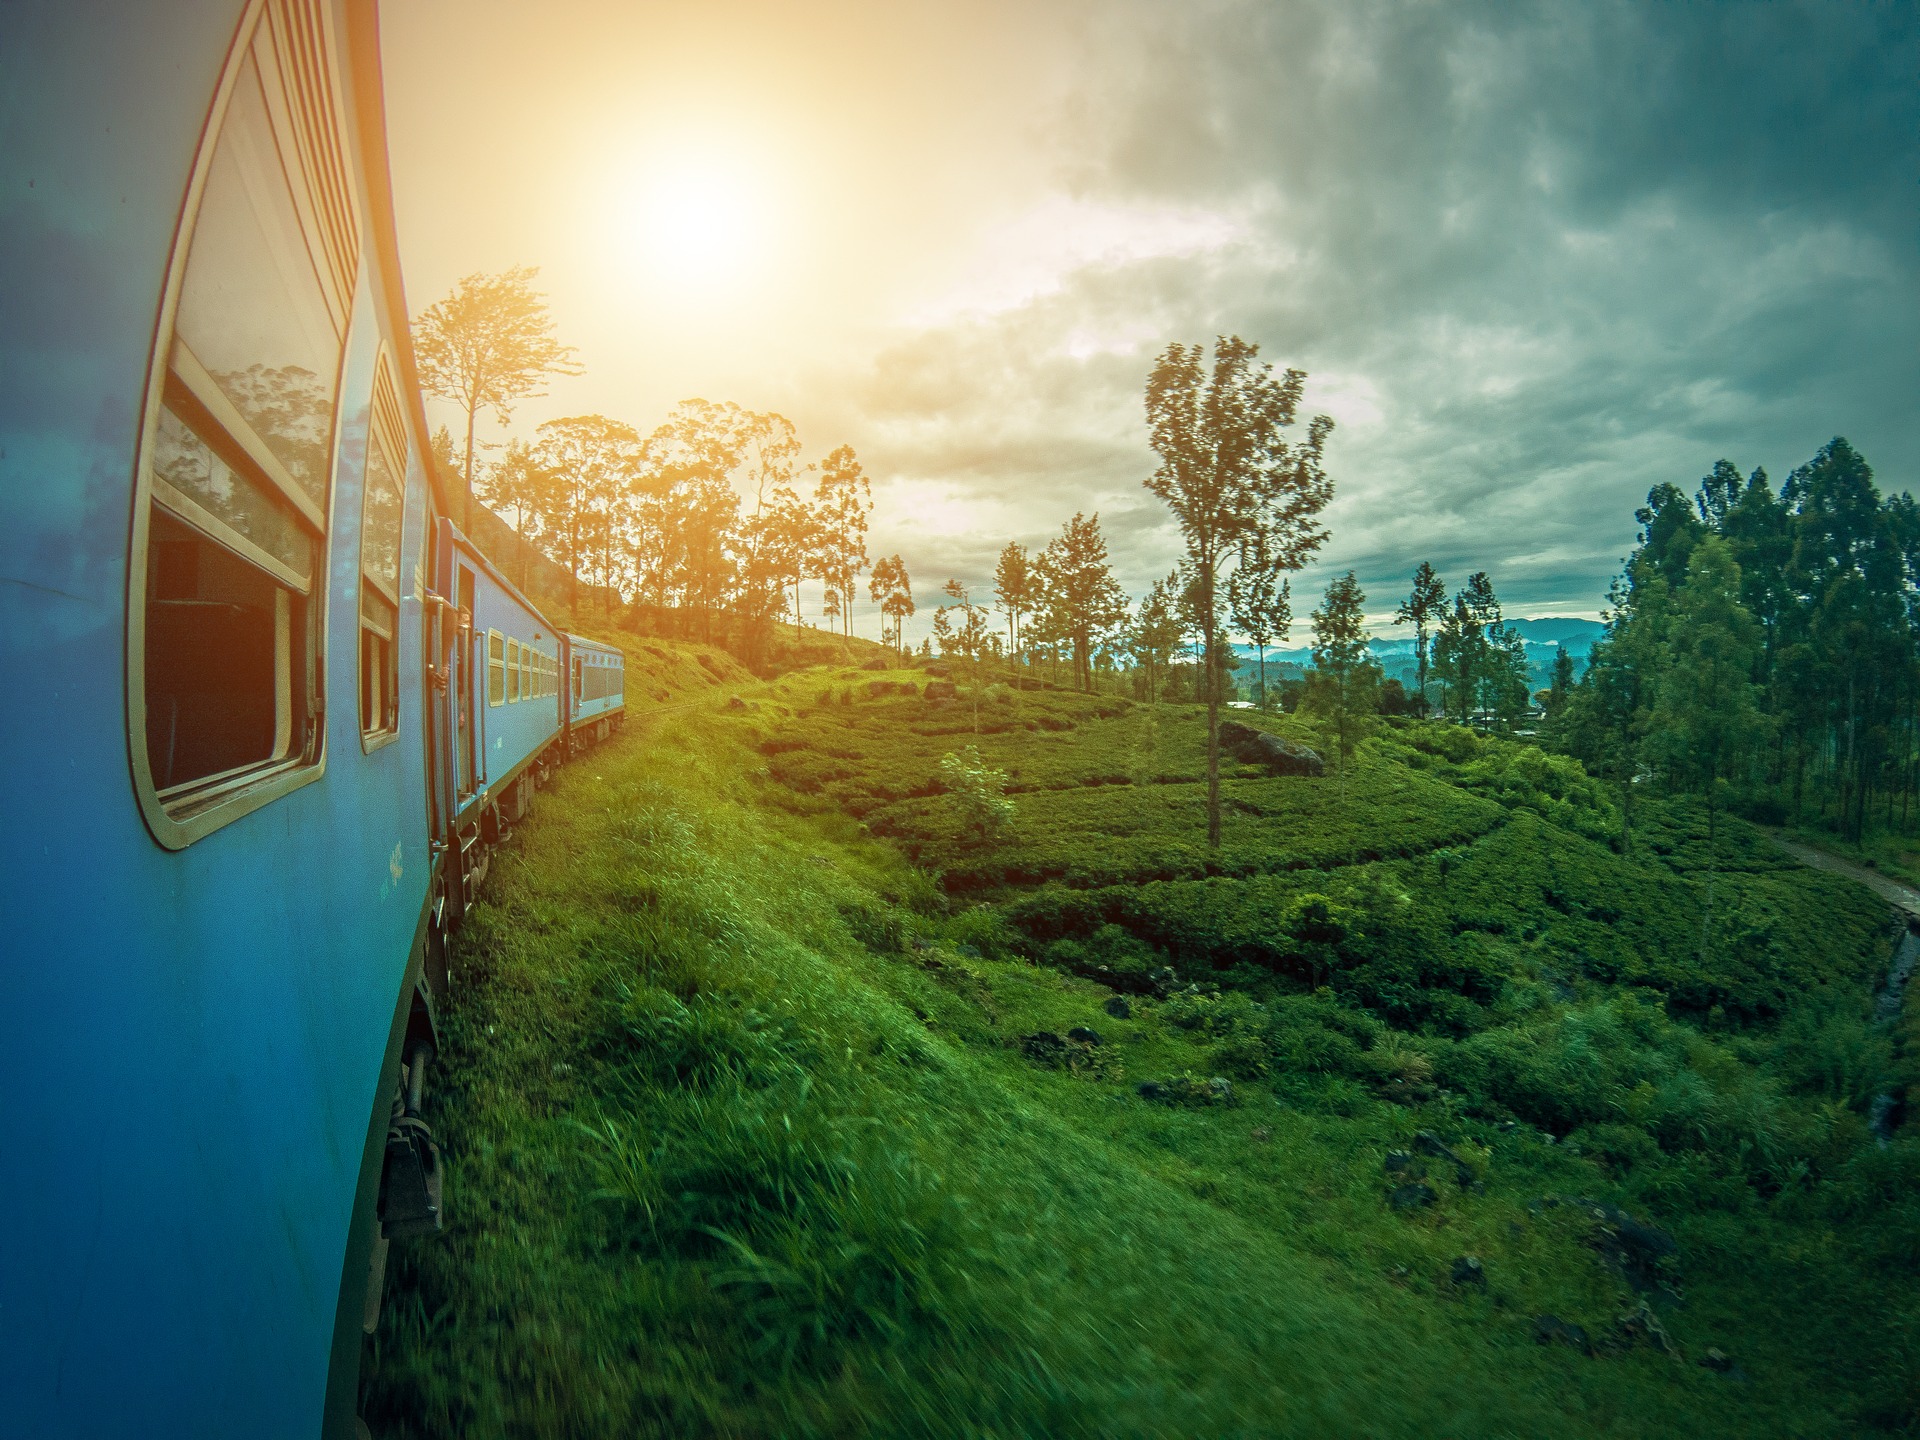 Sri Lanka to target US$ 7 billion in revenue from Tourism by 2020 – Positive expectations for revenue from tourism.